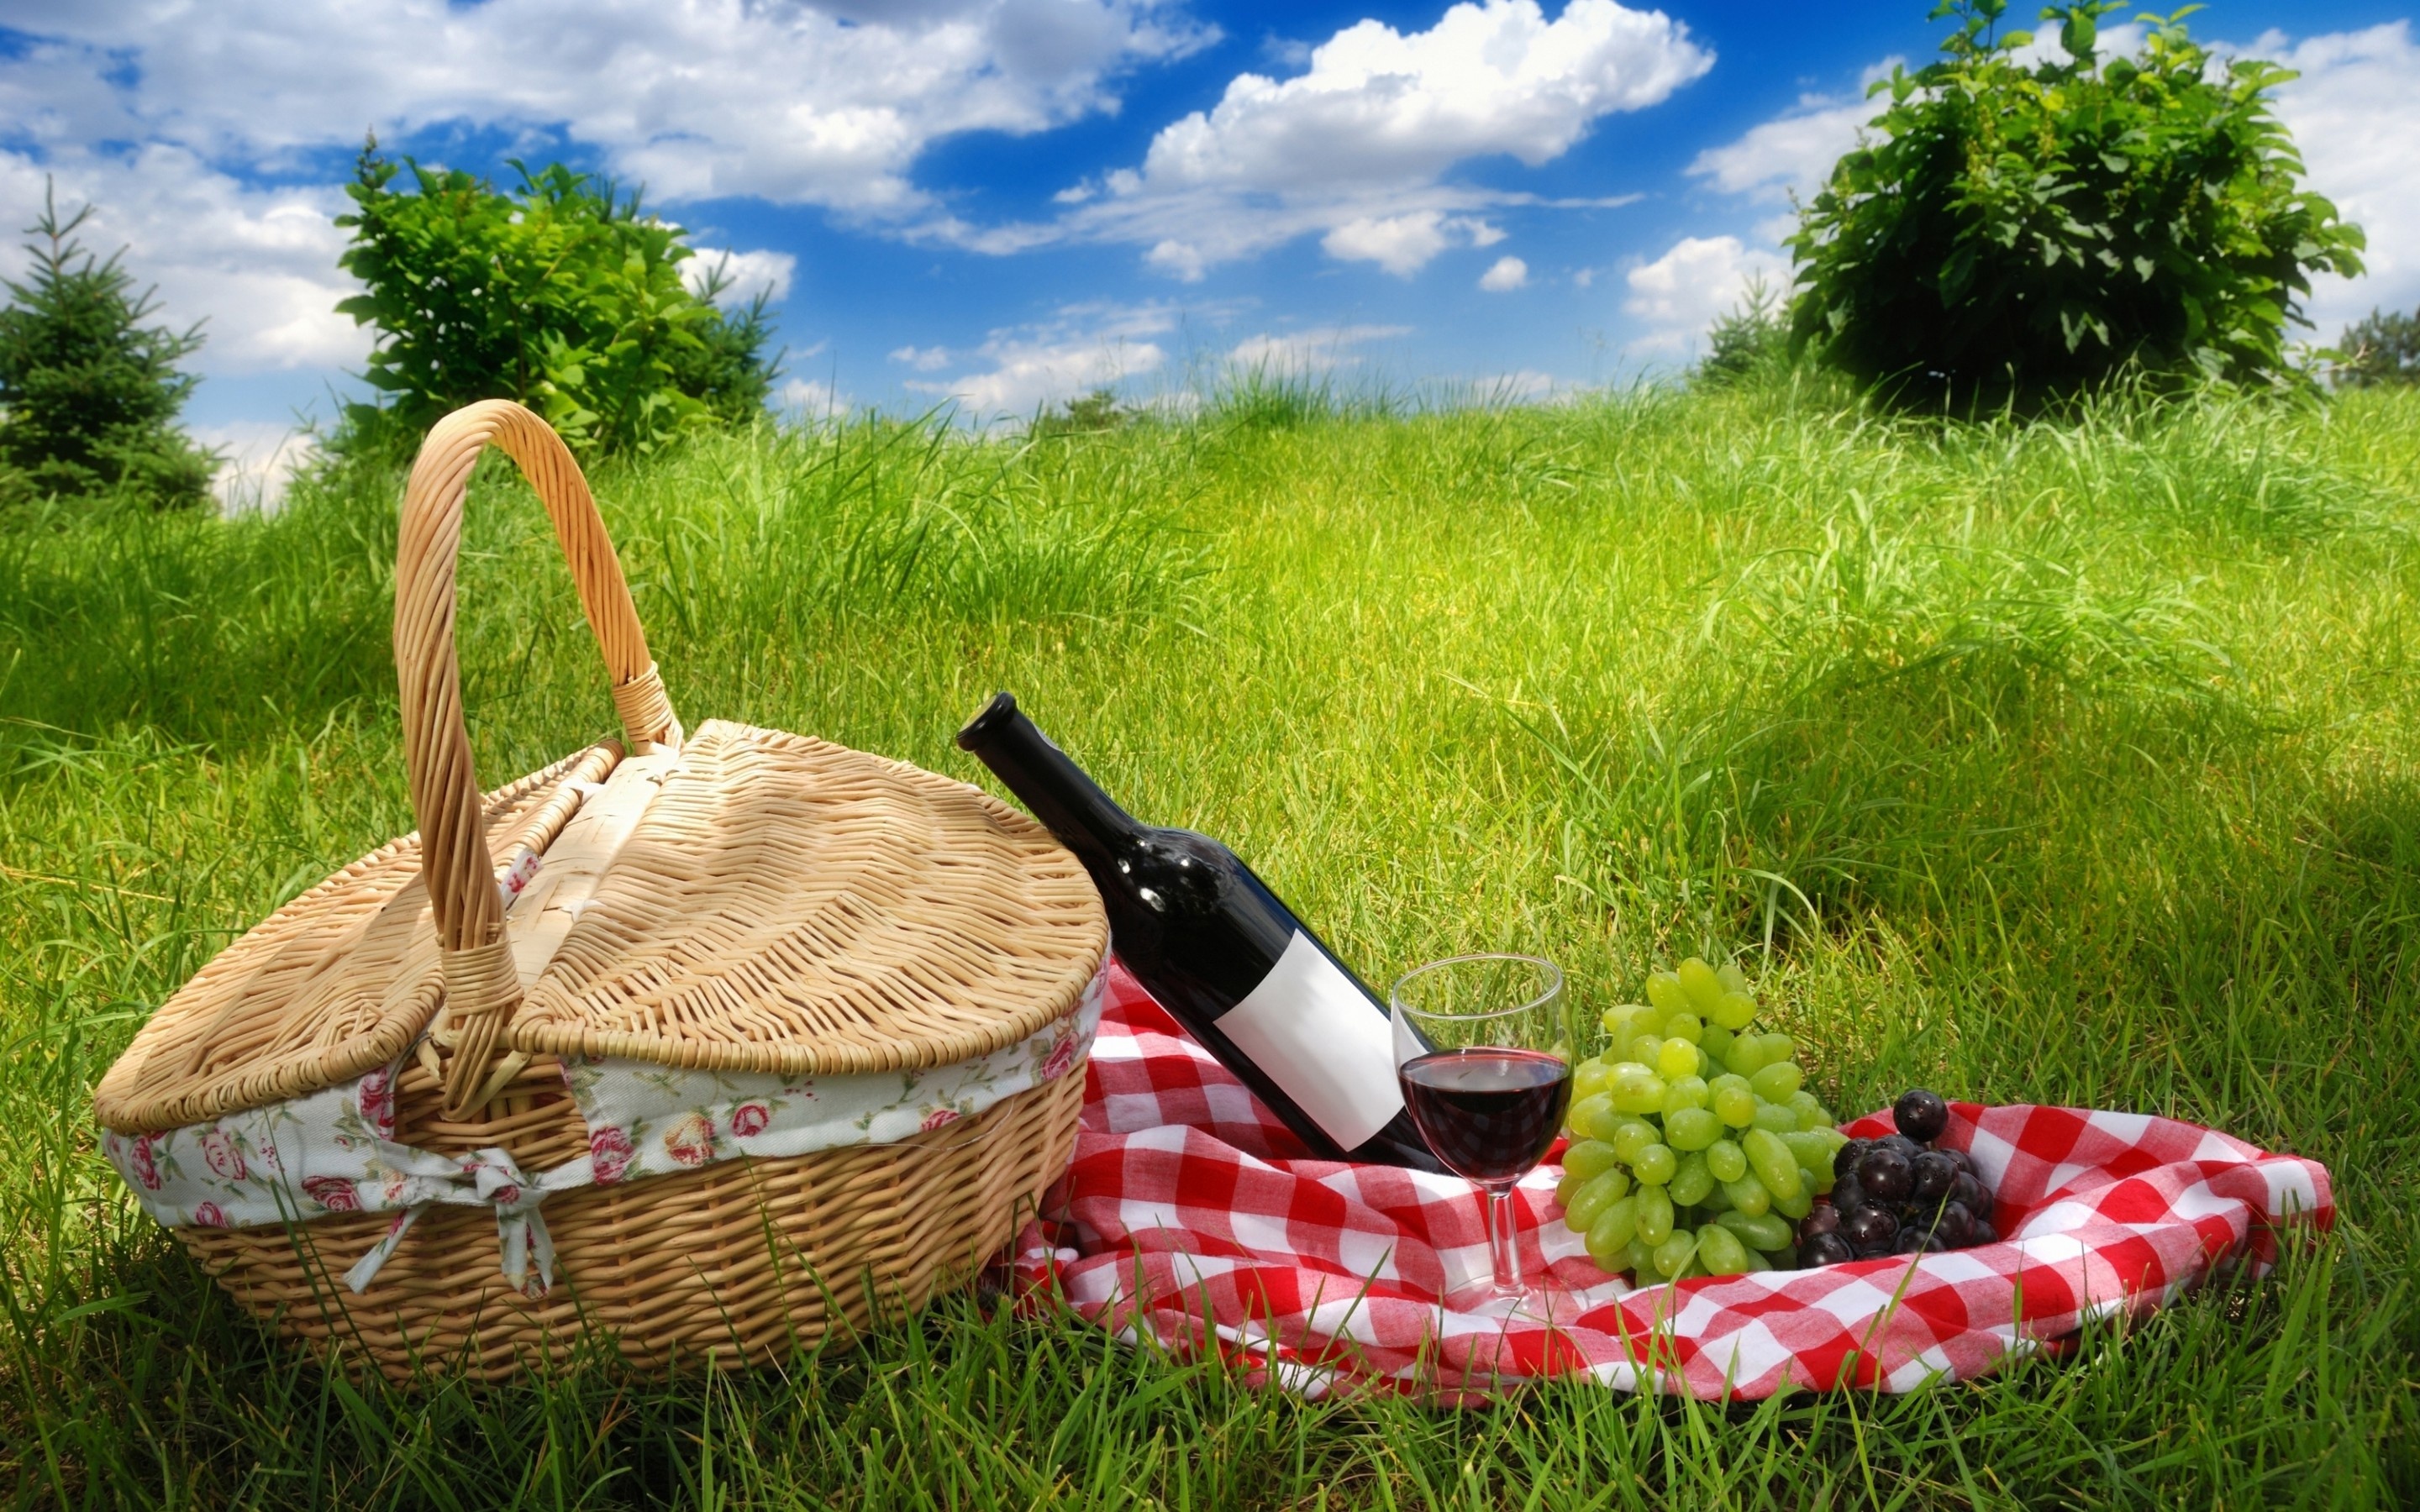 wine, picnic basket, still life, grapes New Lock Screen Backgrounds